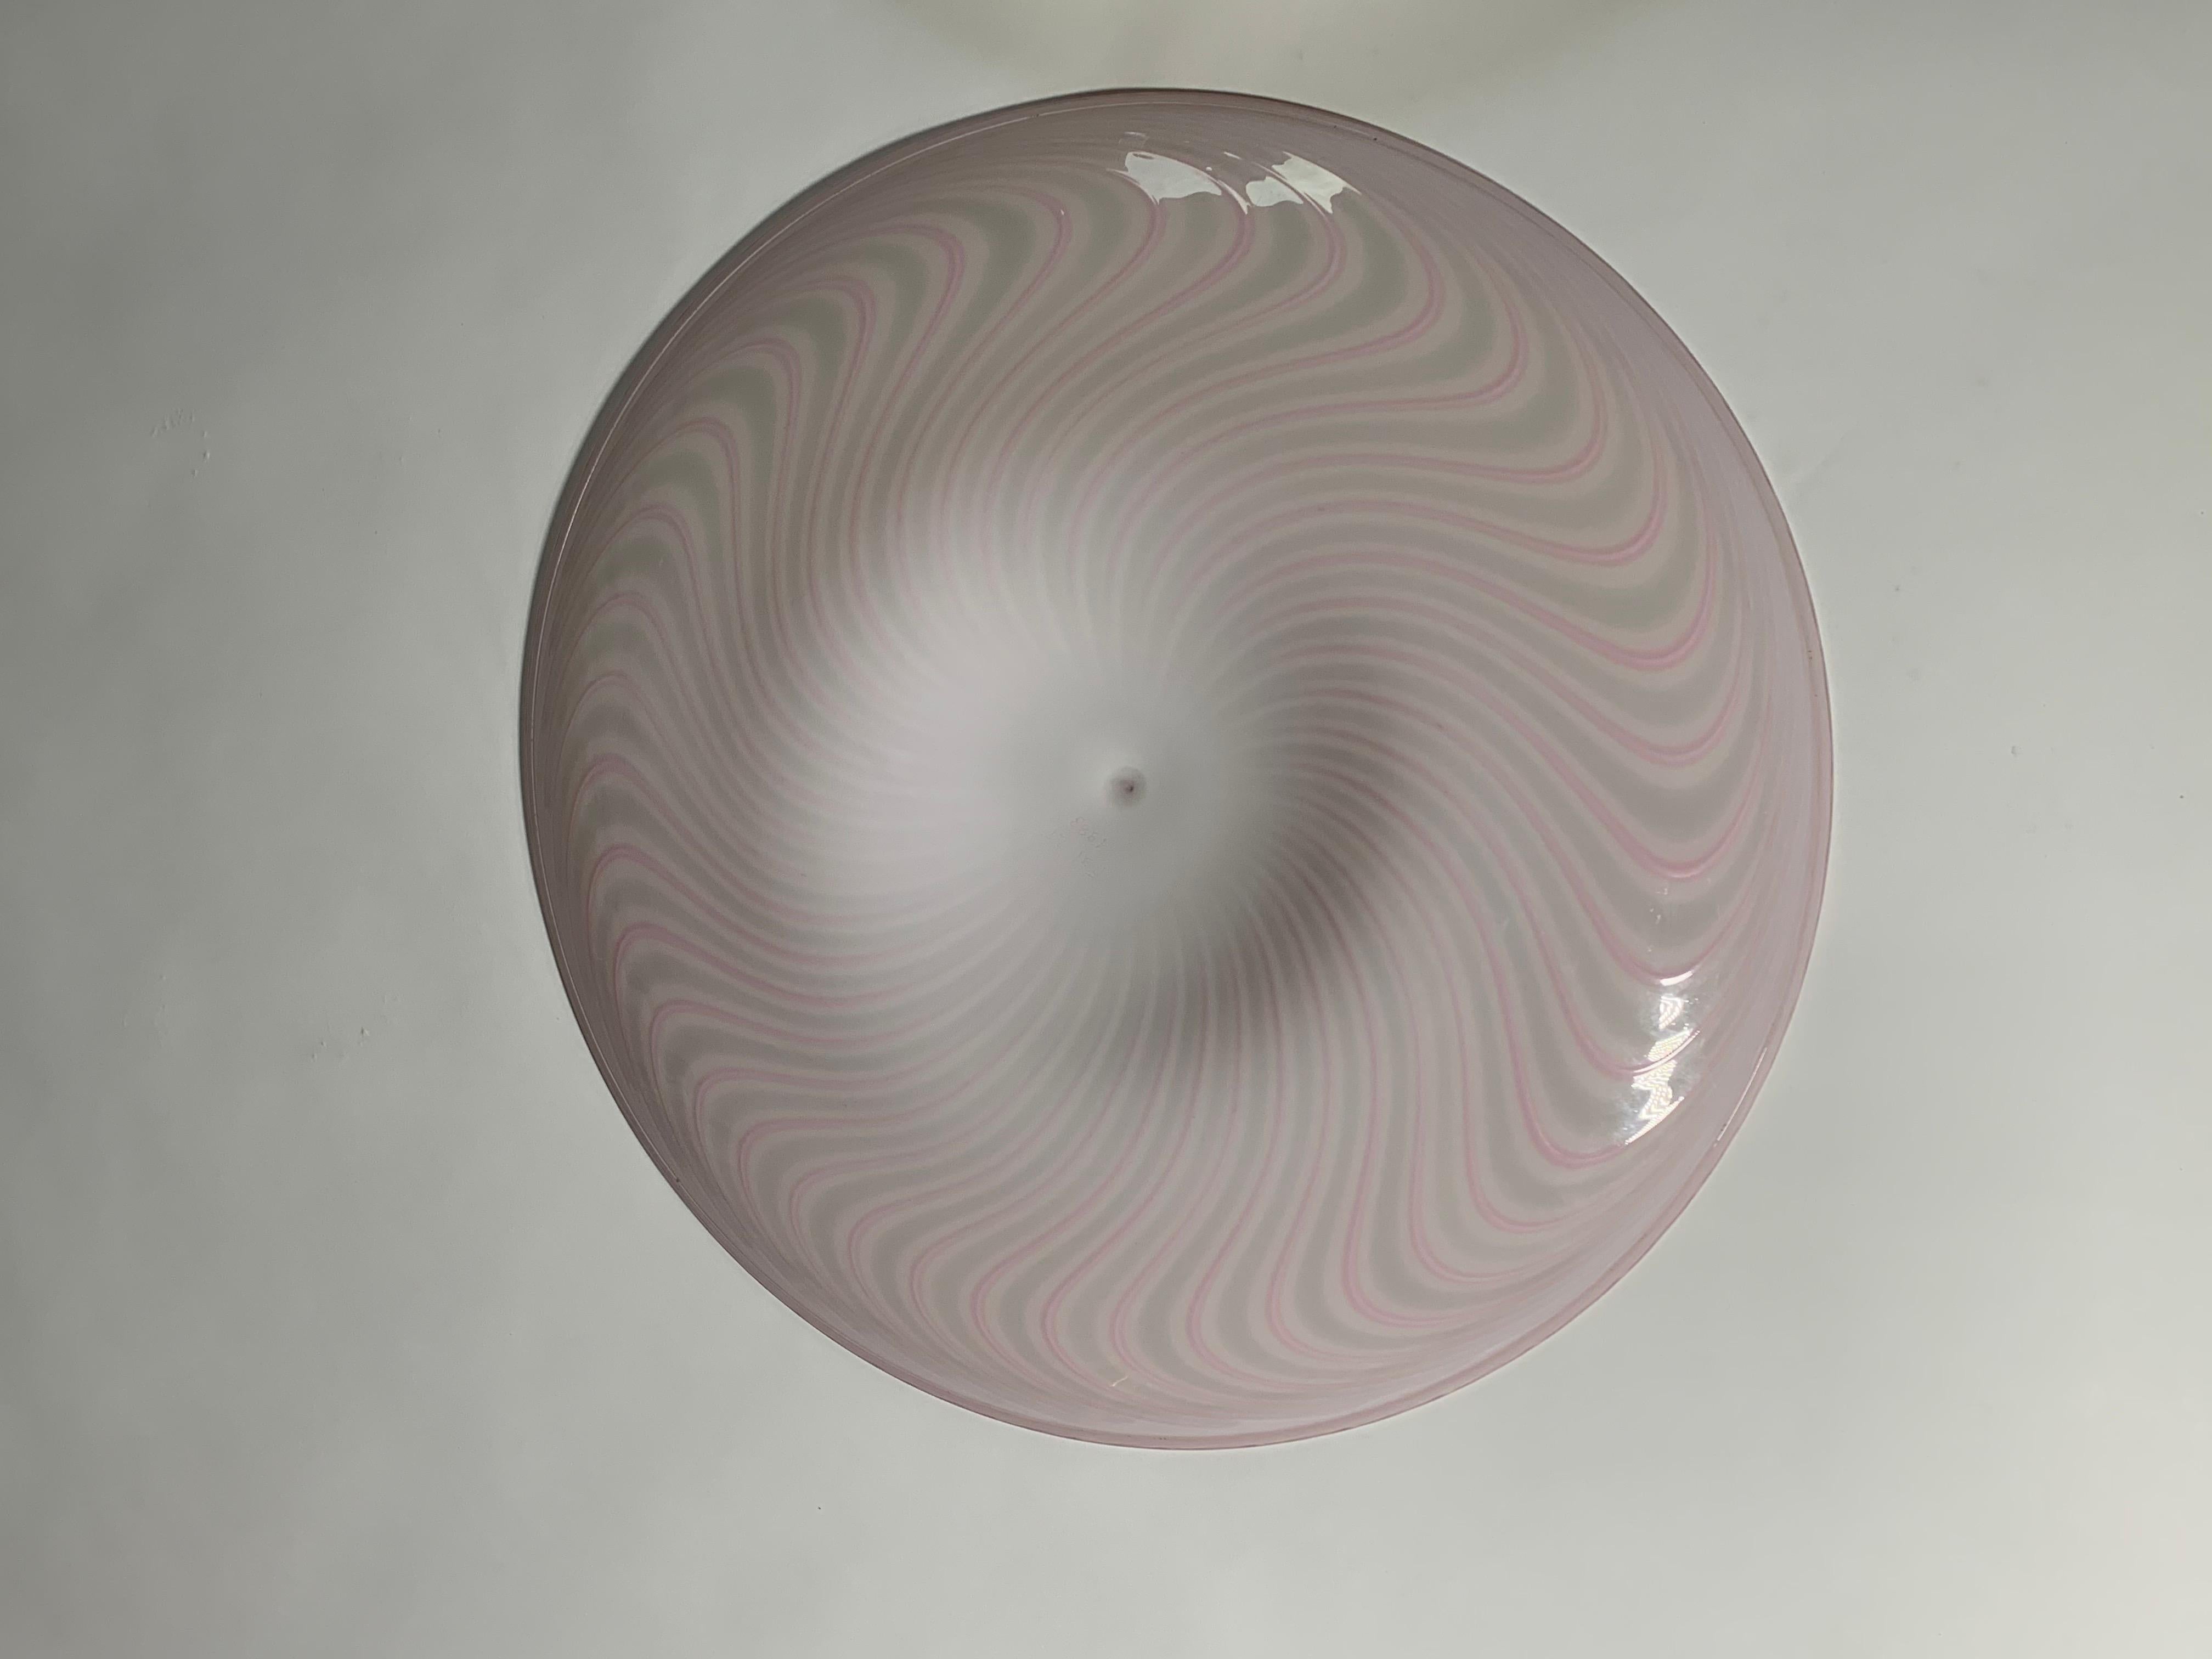 Murano Glass Dish Model Samarcanda by Lino Tagliapietra for F3 International In Excellent Condition For Sale In Milan, Italy